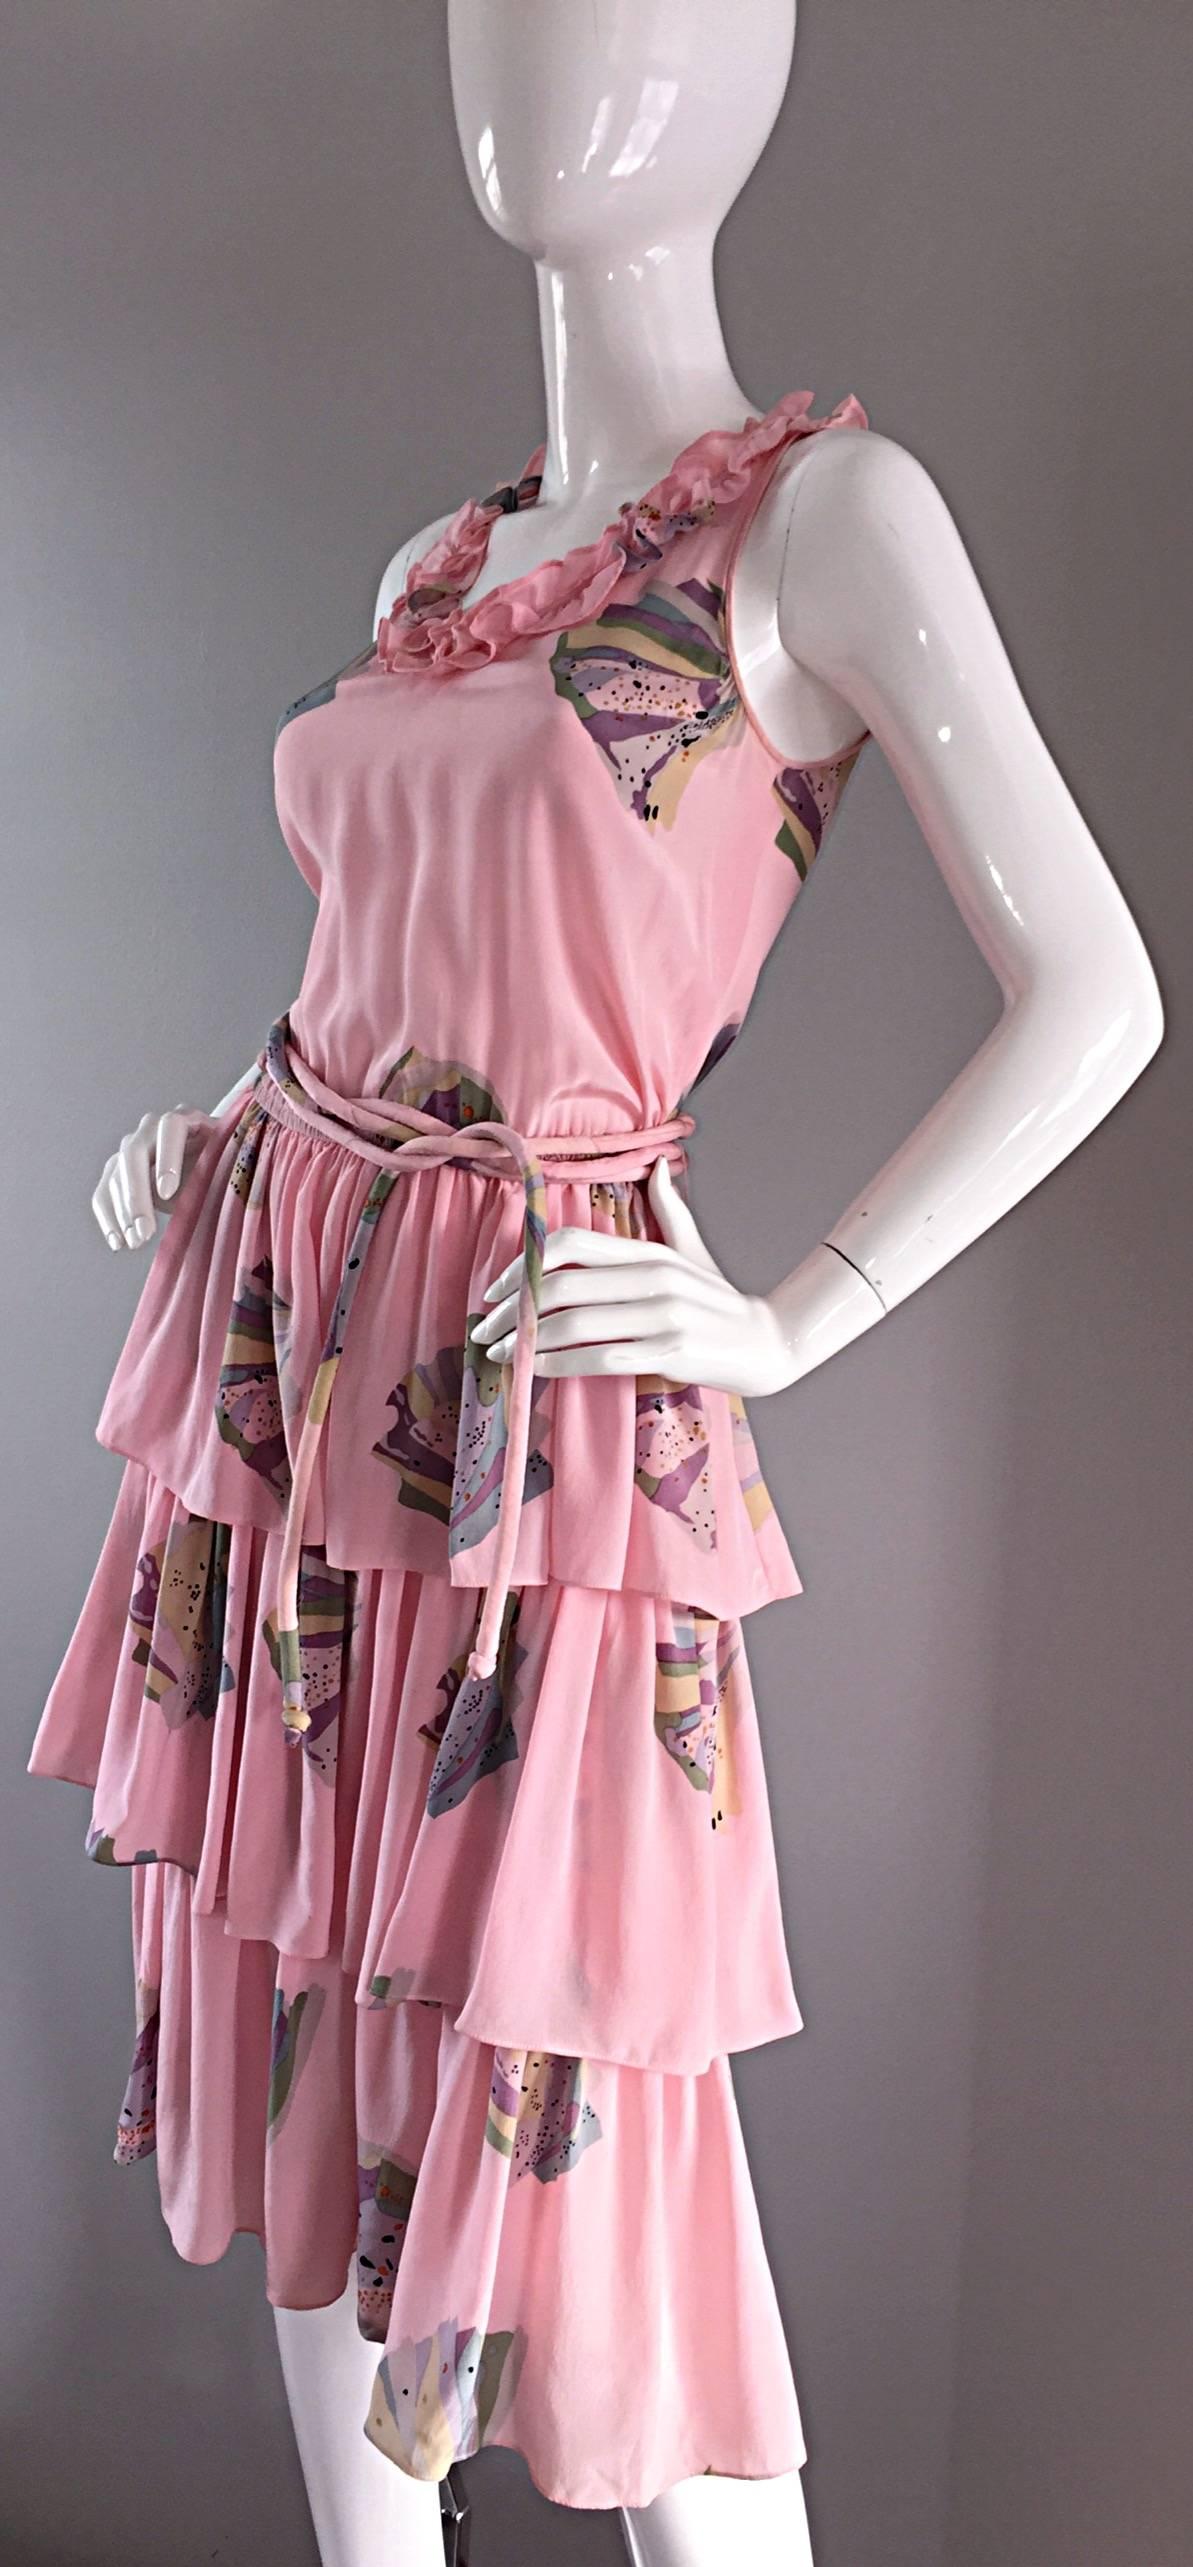 Beautiful vintage Mary McFadden flapper style dress! Light pink silk, with fan prints throughout. Three tiered layers on the skirt, with a ruffled neck. Long corded belt can be wrapped around the waist a few times, or left in a long bow. Looks